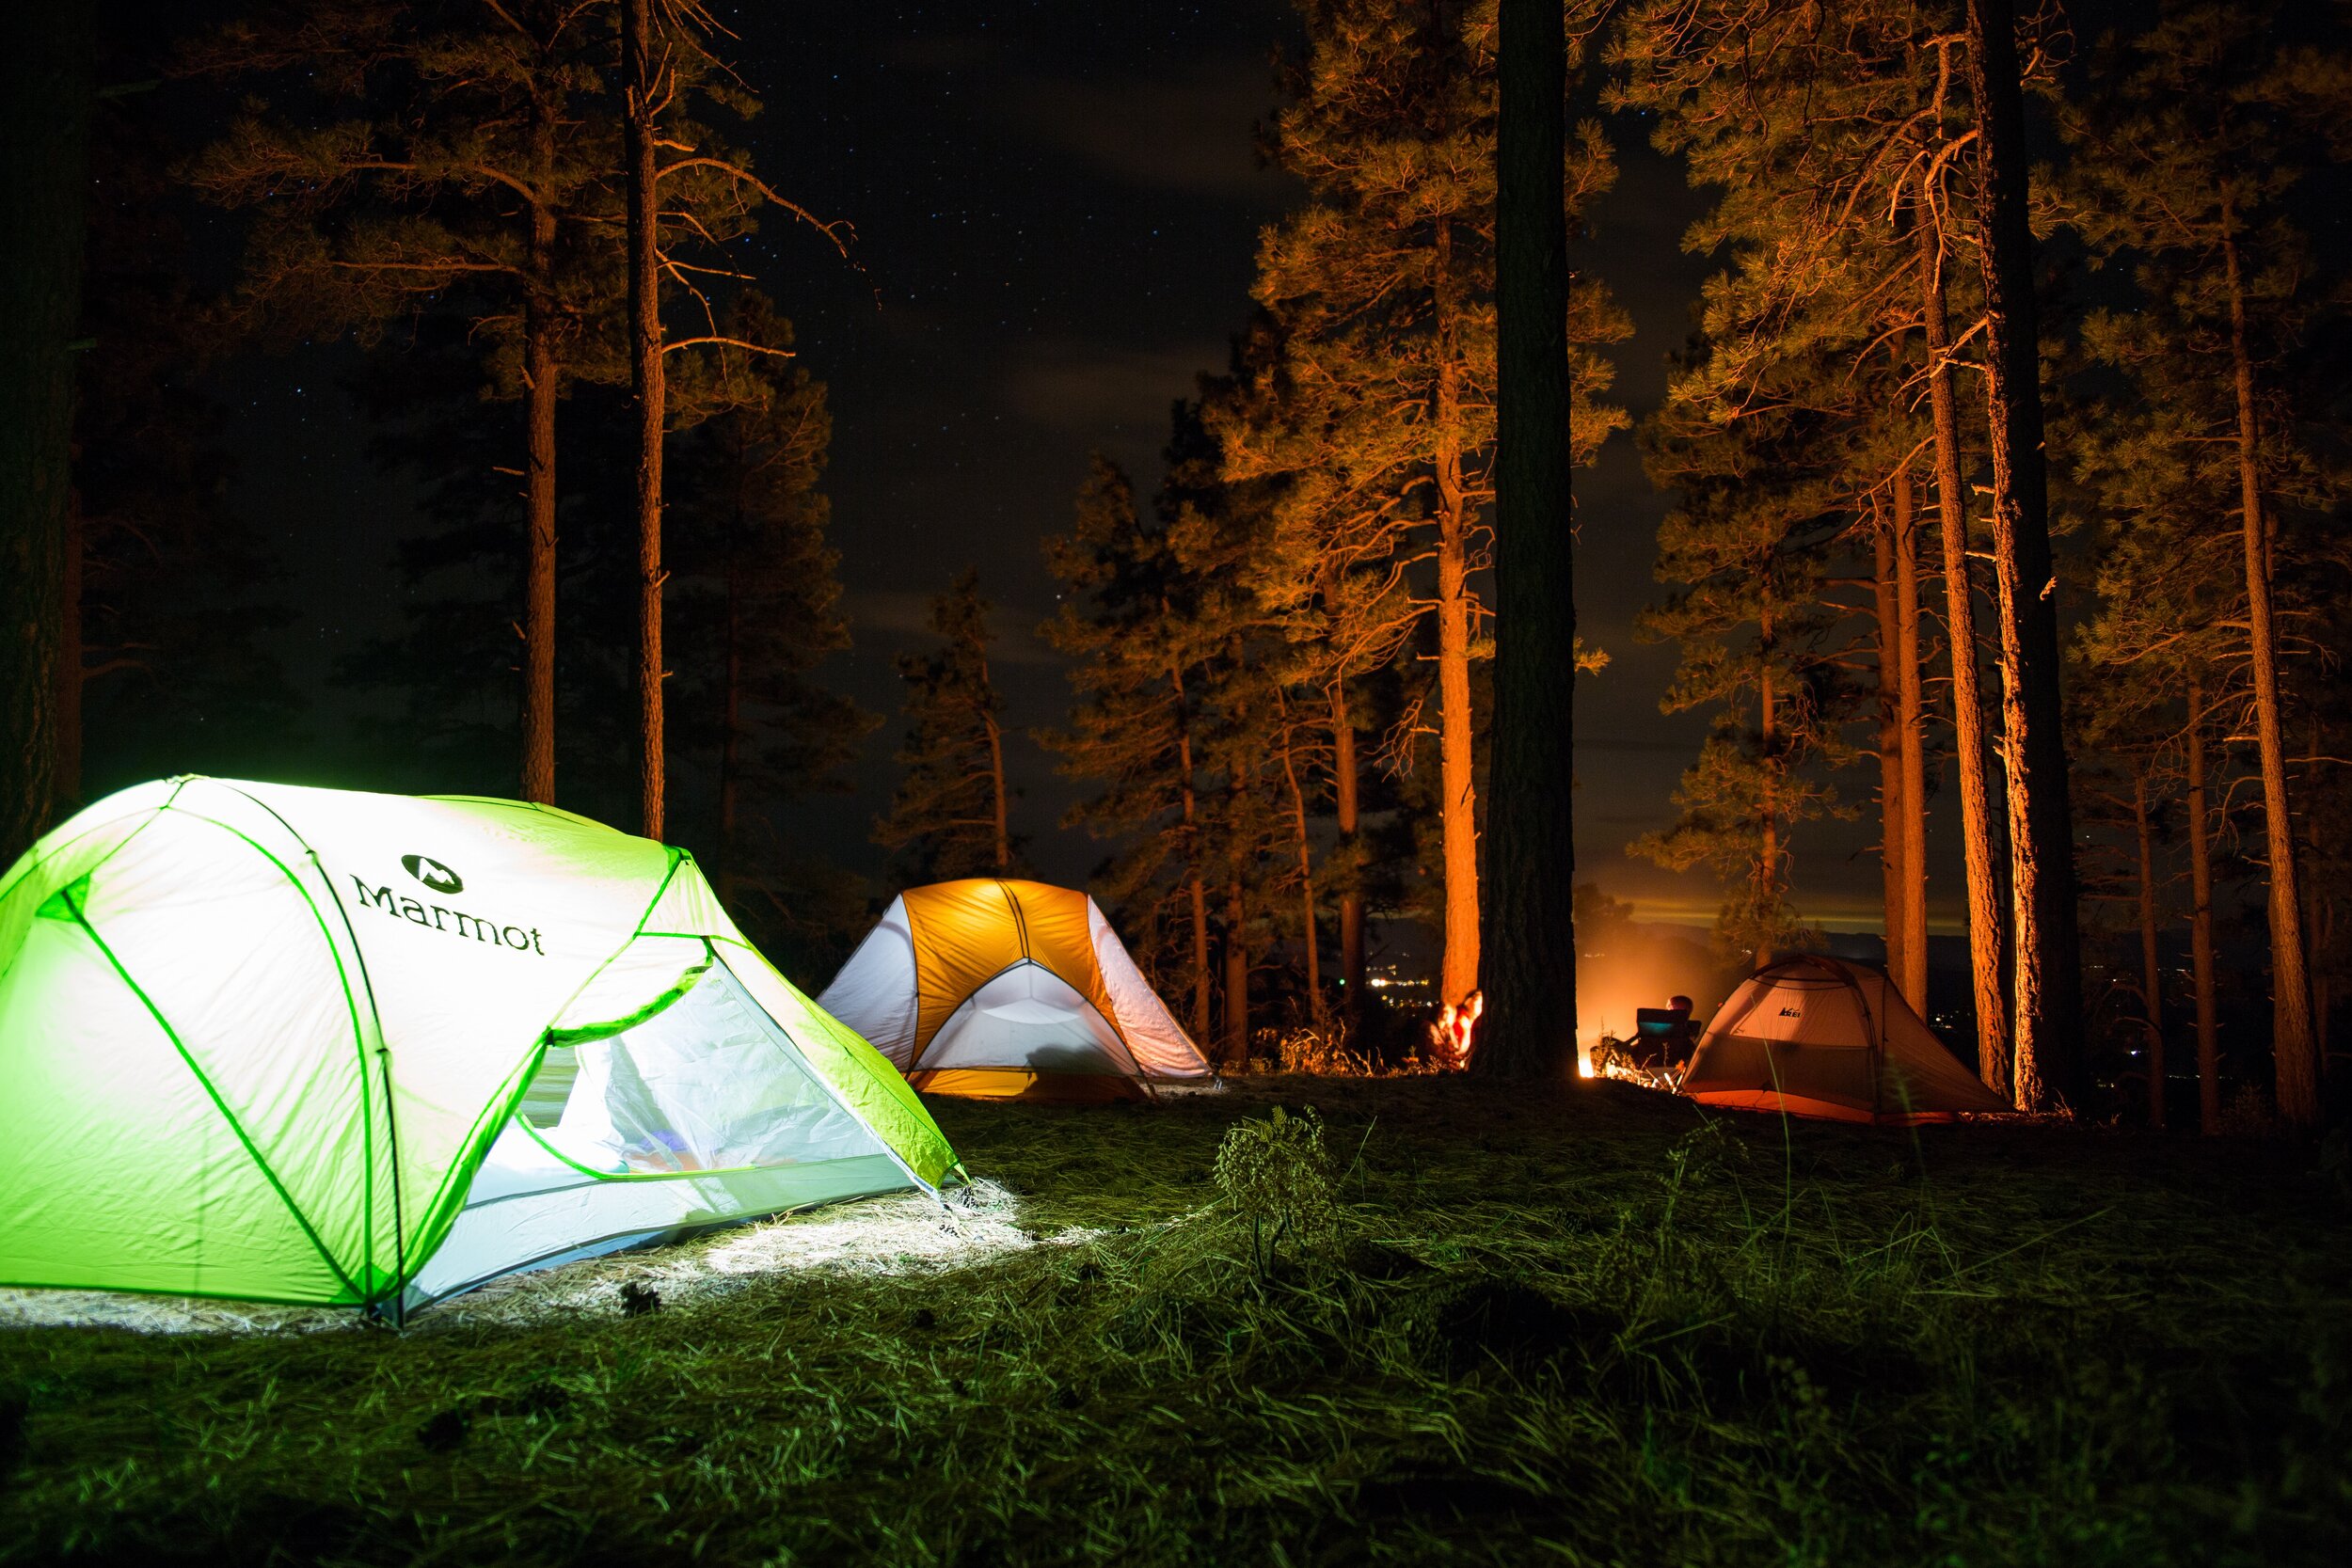 tents in woods at night.jpg